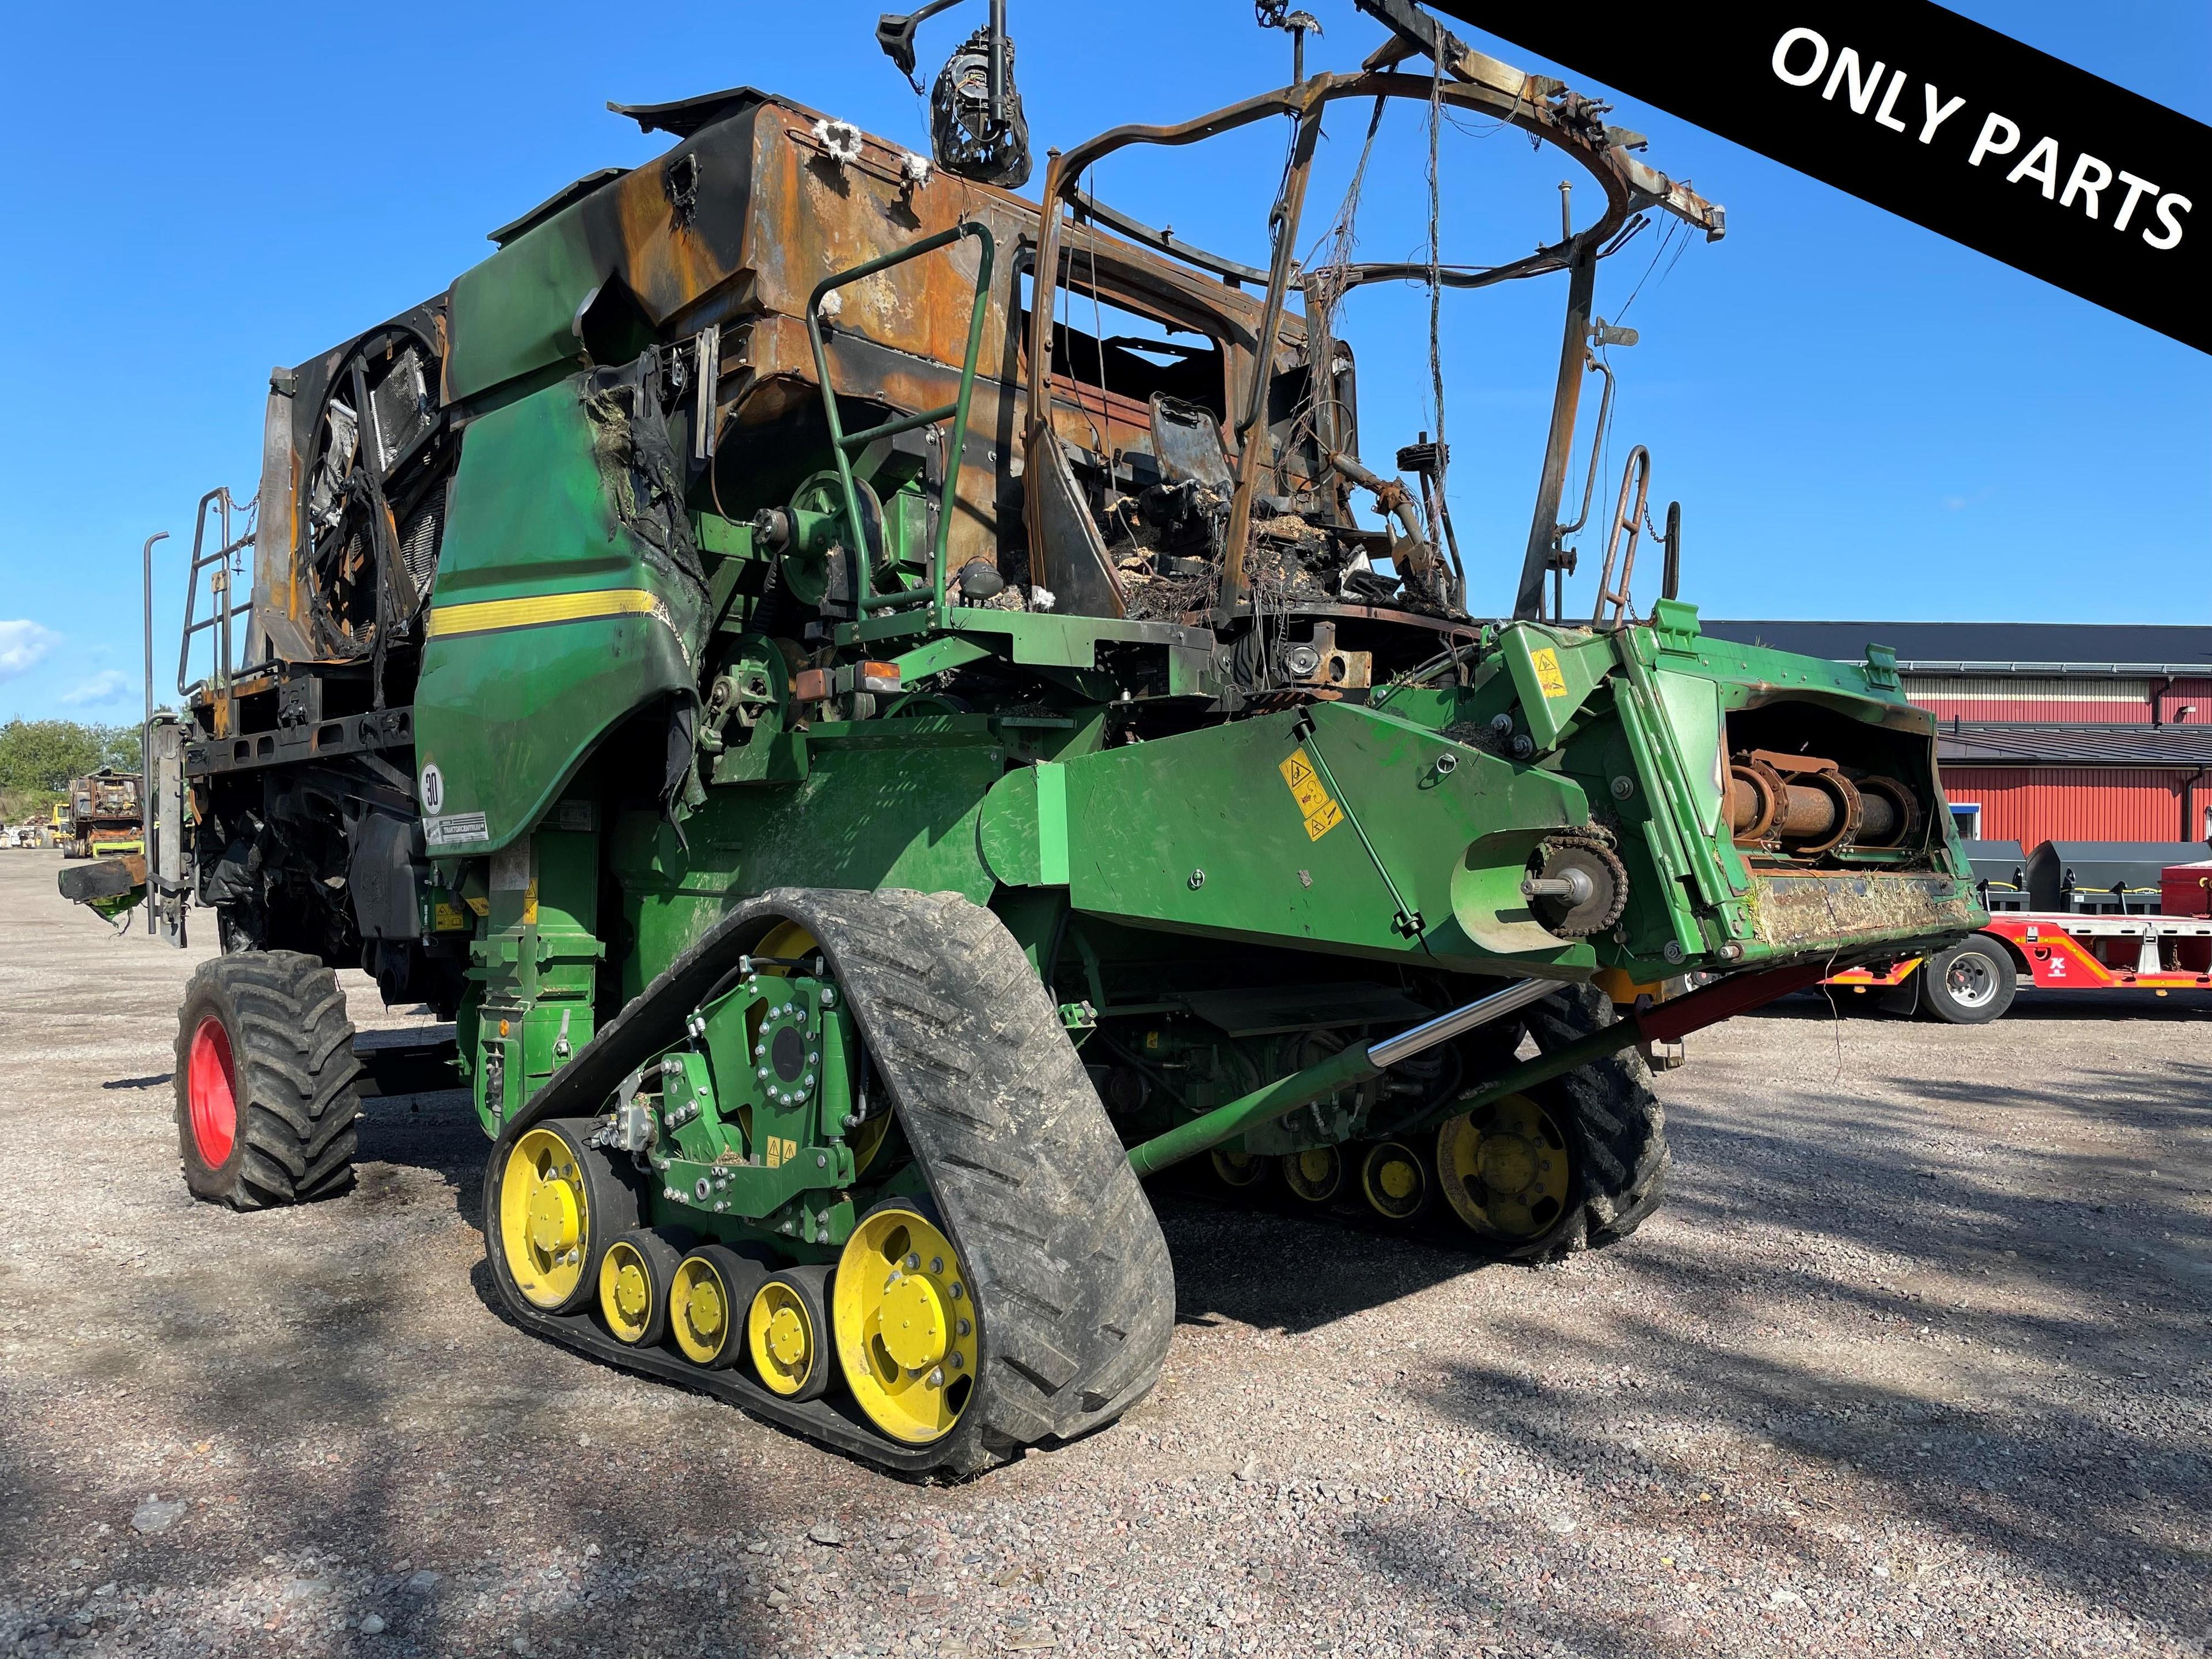 John Deere T 670 i Dismantled: only spare parts Maaidorsmachines